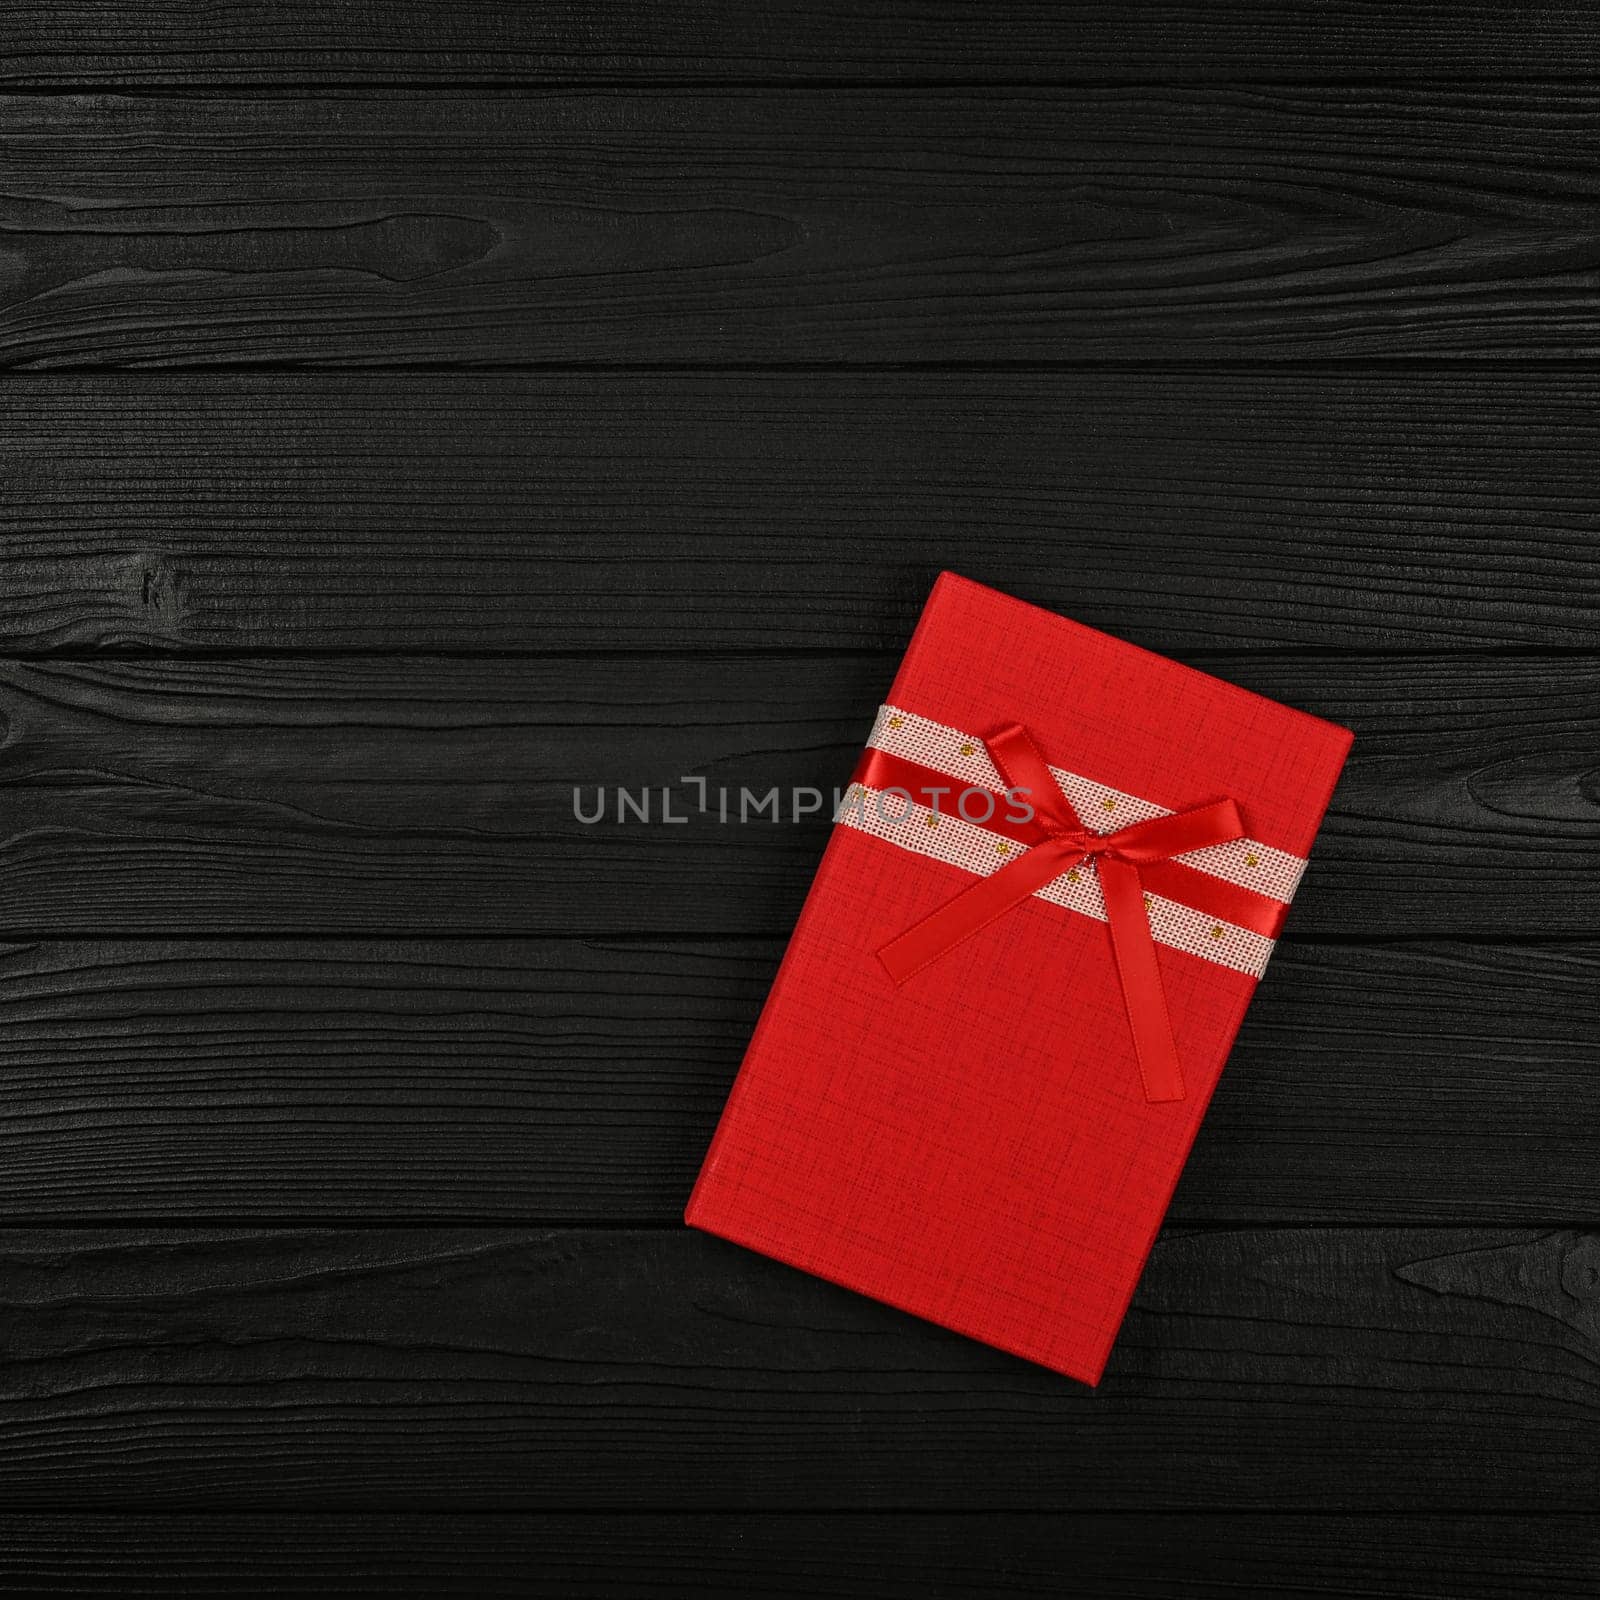 One red gift box on black wooden table by BreakingTheWalls